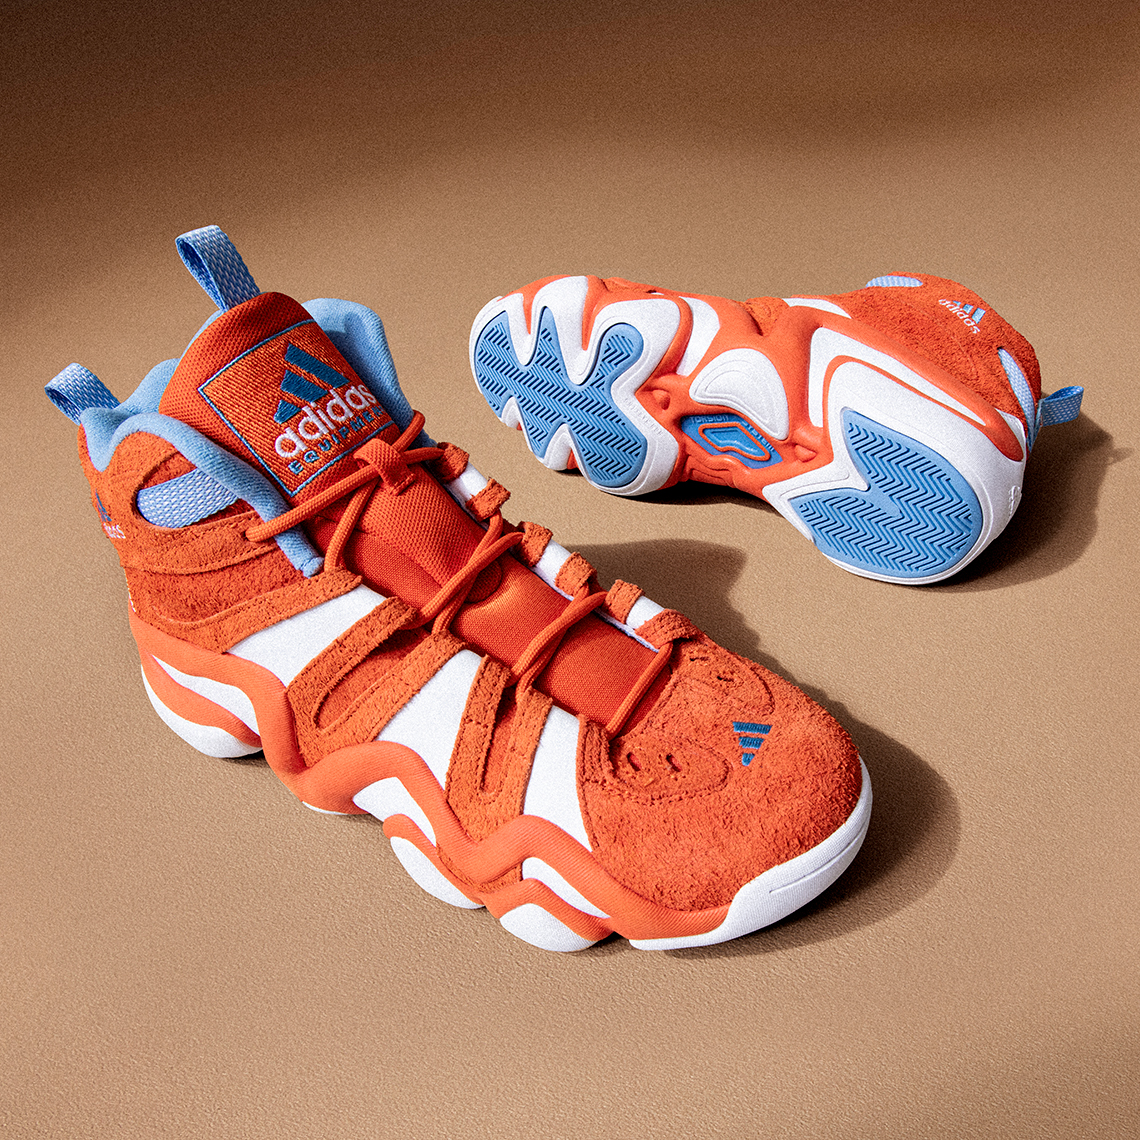 The adidas Crazy 8 sneakers in 